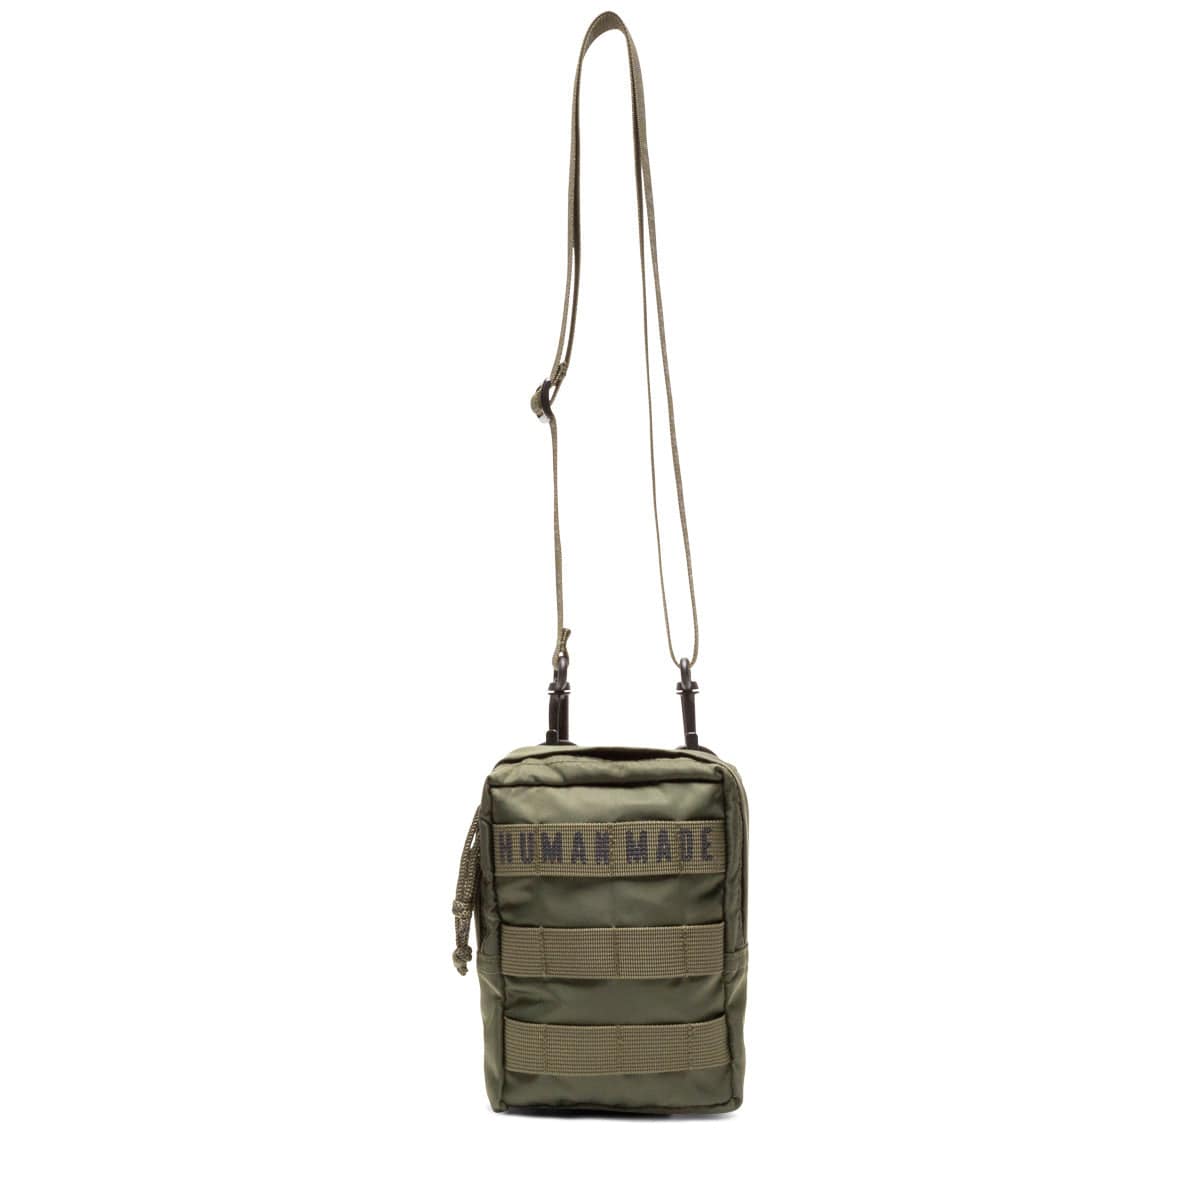 MILITARY POUCH #2 OLIVE DRAB | Bodega